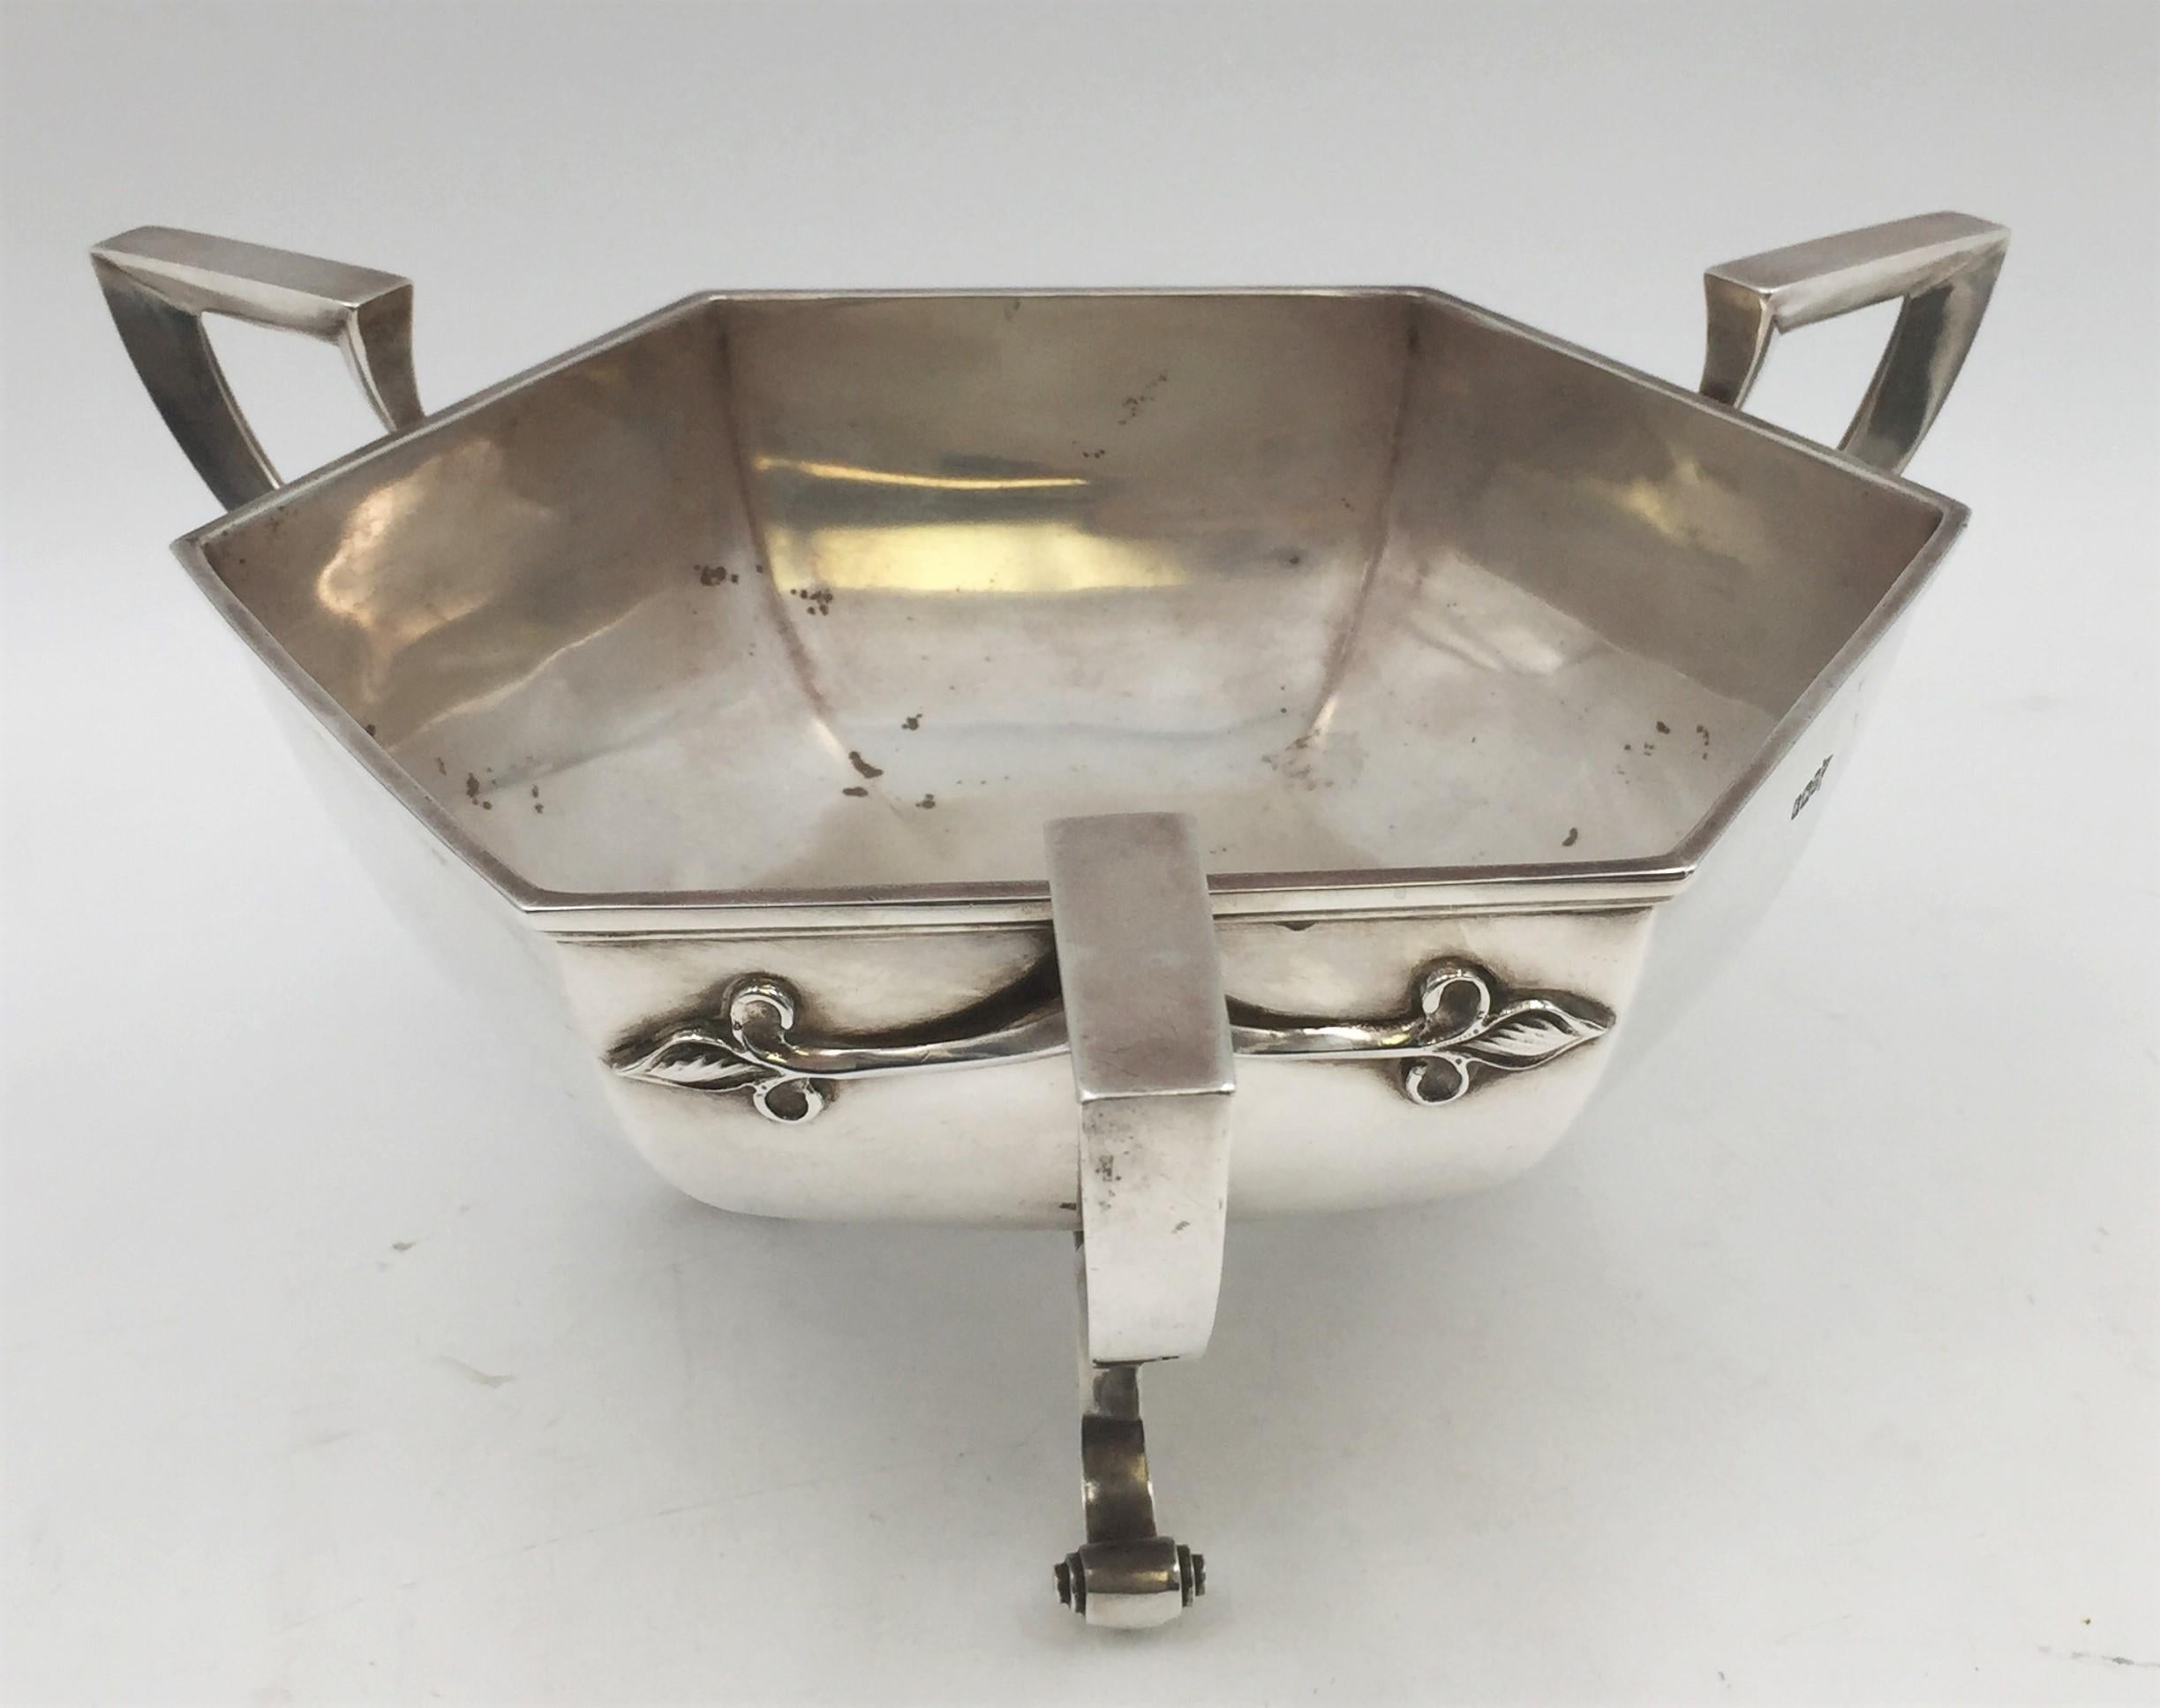 Walker & Hall sterling silver centerpiece bowl from 1904, made in Sheffield, England. This hexagonal-shaped bowl stands on three curvilinear legs, has three handles with applied motifs which are characteristic of the Art Nouveau style, and a